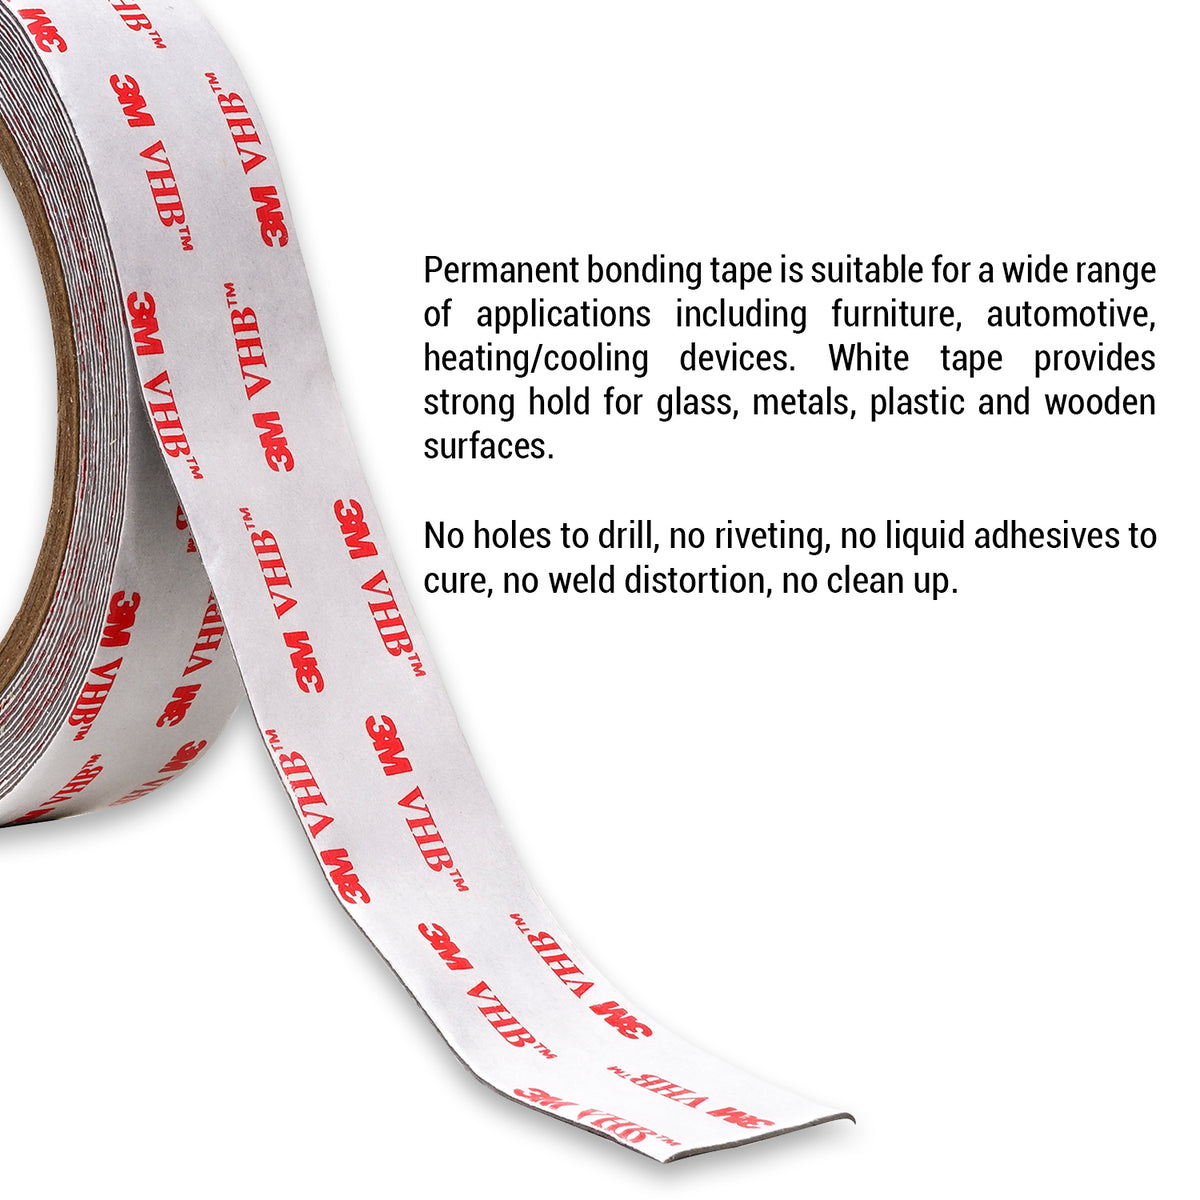 CANOPUS GBJHK5T 3M Double Sided Tape Heavy Duty: Mounting Tape Converted  from 3M VHB 5952, (0.75 in x 15 ft) Super Strong Foam Tape for